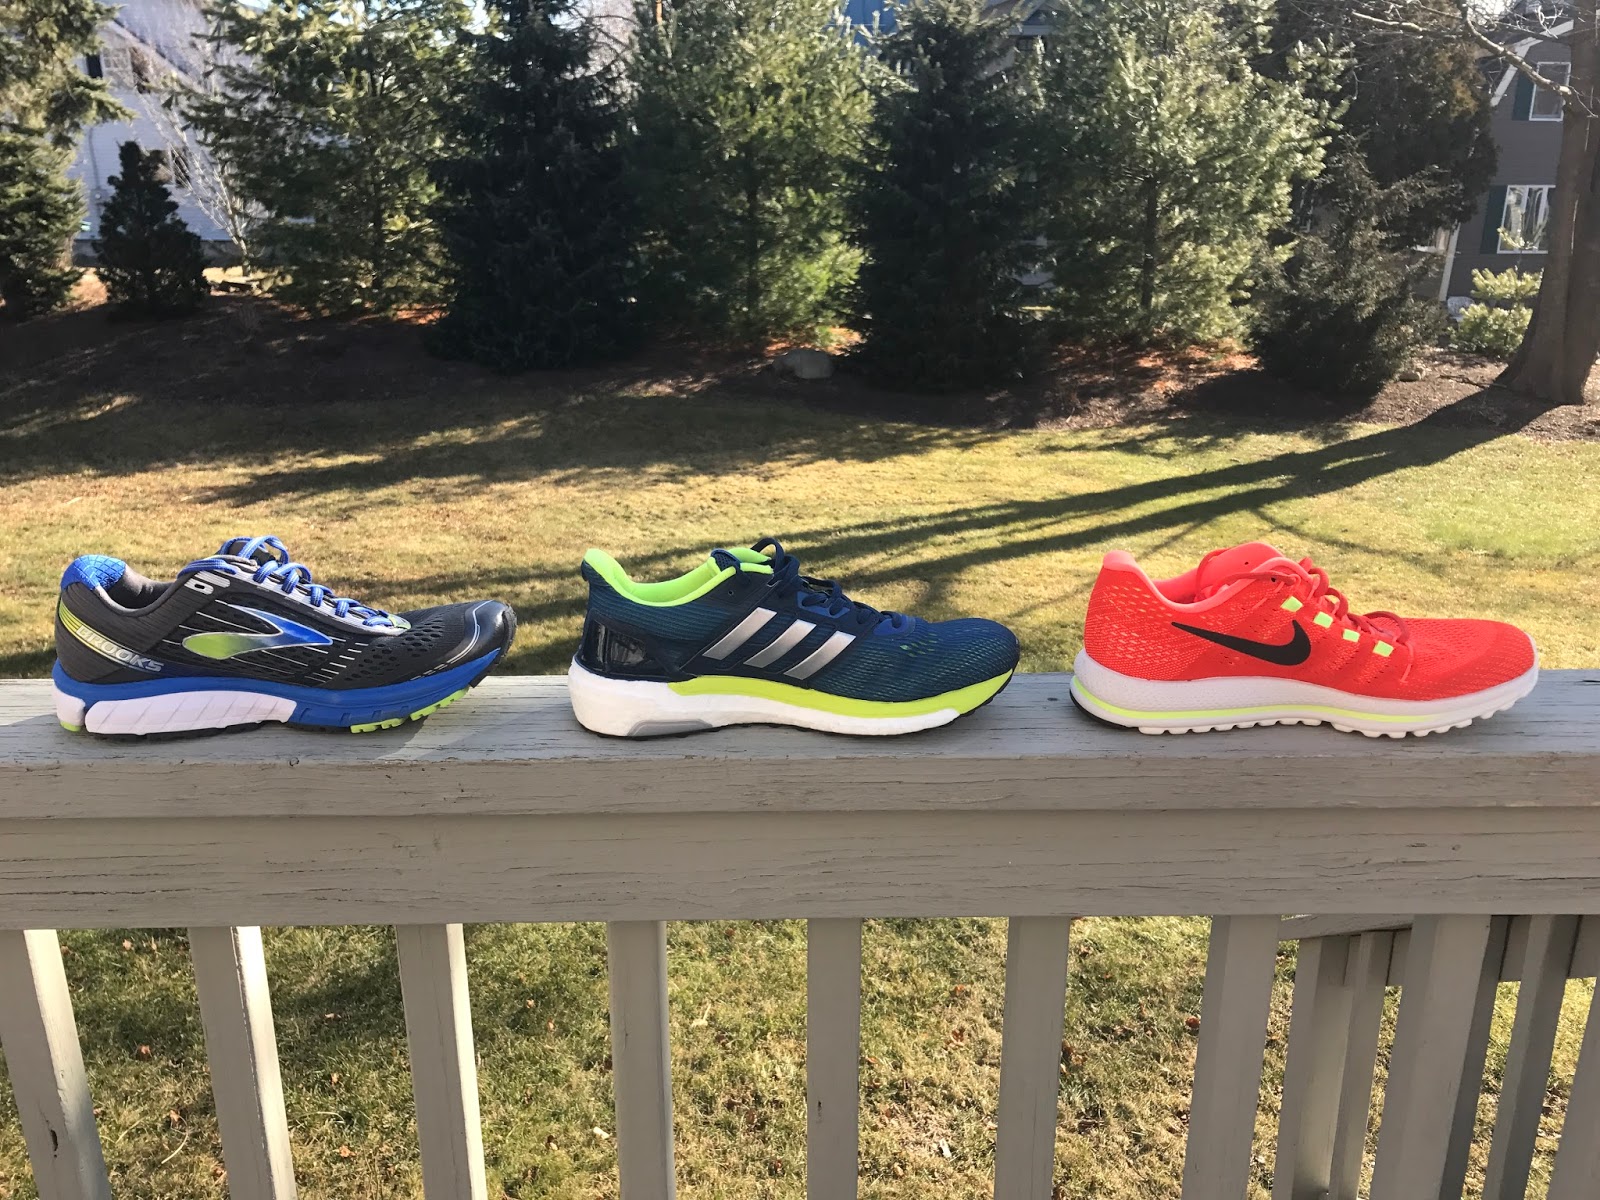 Road Trail Run: Reviews and Nike Zoom Vomero 12, Brooks Ghost 9, and adidas Glide